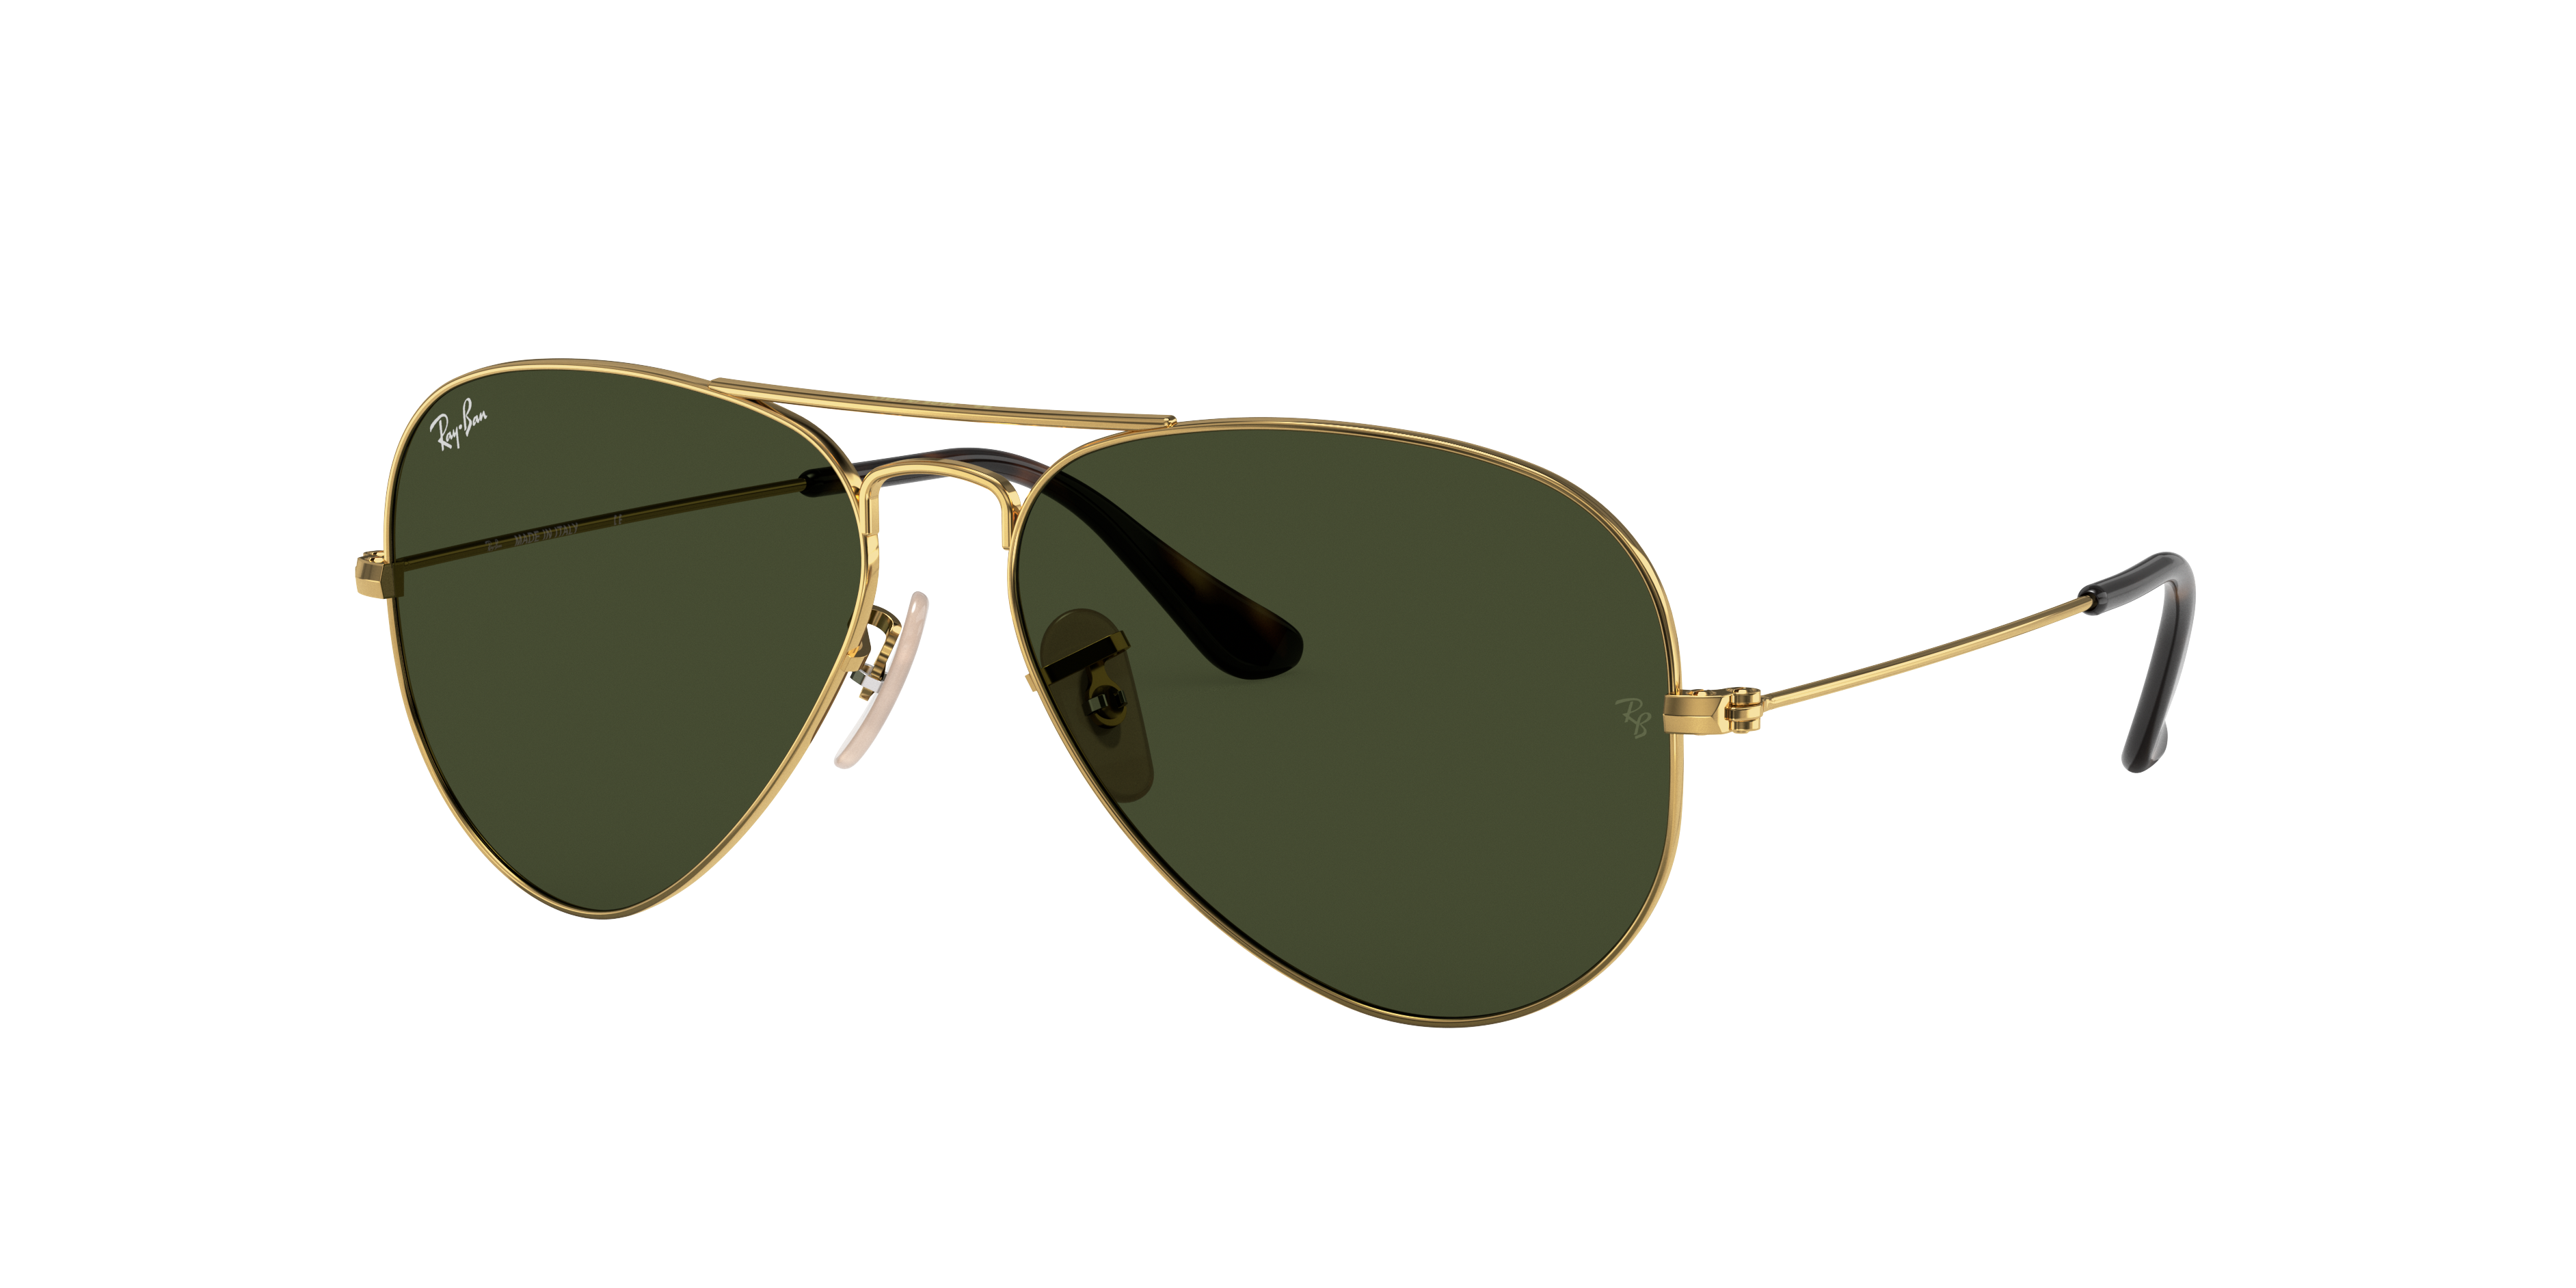 ray ban sunglasses latest collection